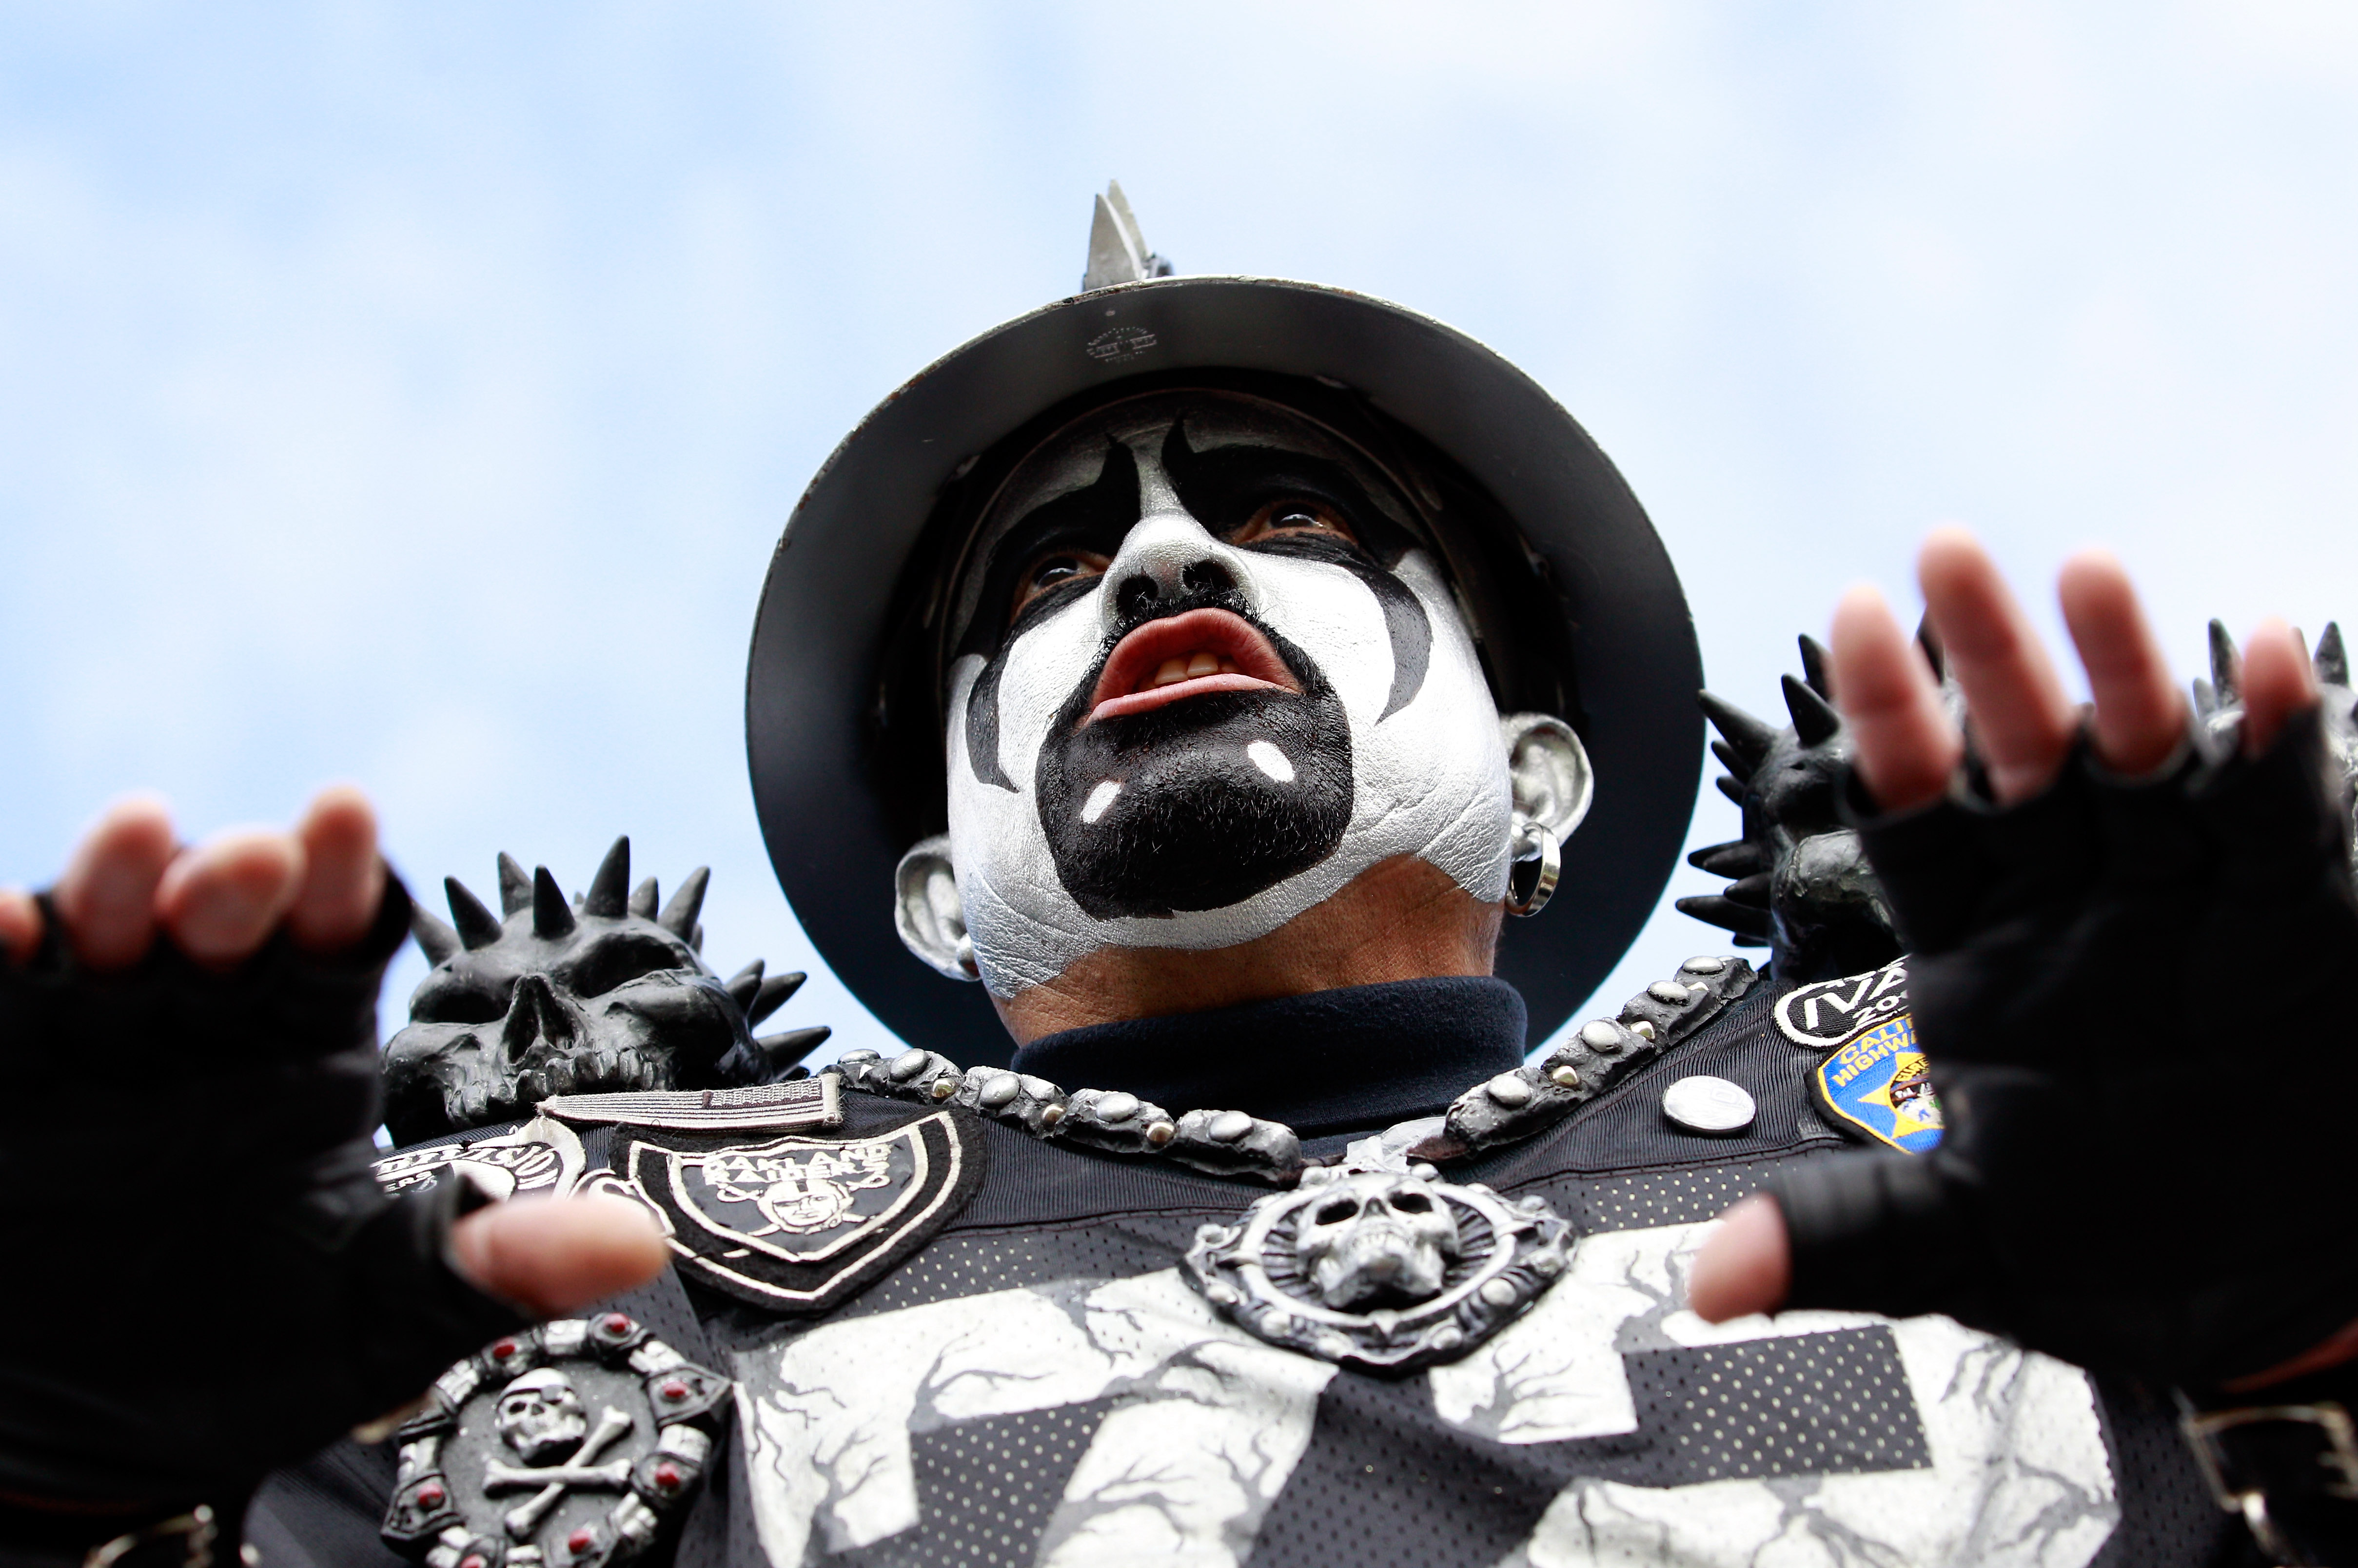 JACKSONVILLE, FL - DECEMBER 12:  A fan of the Oakland Raiders cheers during the game against the Jacksonville Jaguars at EverBank Field on December 12, 2010 in Jacksonville, Florida.  (Photo by Sam Greenwood/Getty Images)